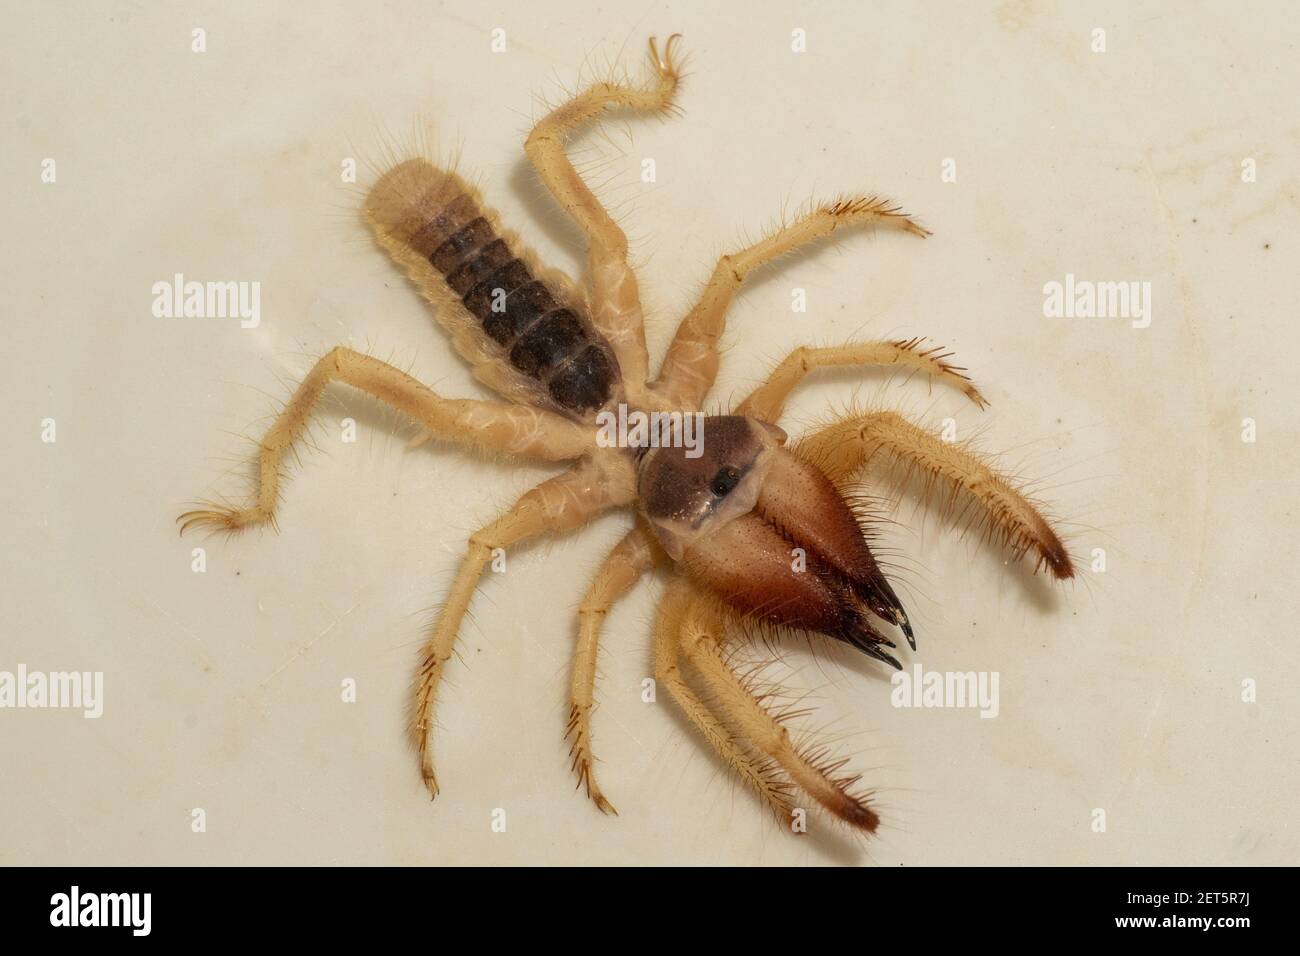 Egyptian giant solpugids (Galeodes Arabs), wind scorpion or camel spider macro shot close up in the united arab emirates in the middle east Stock Photo